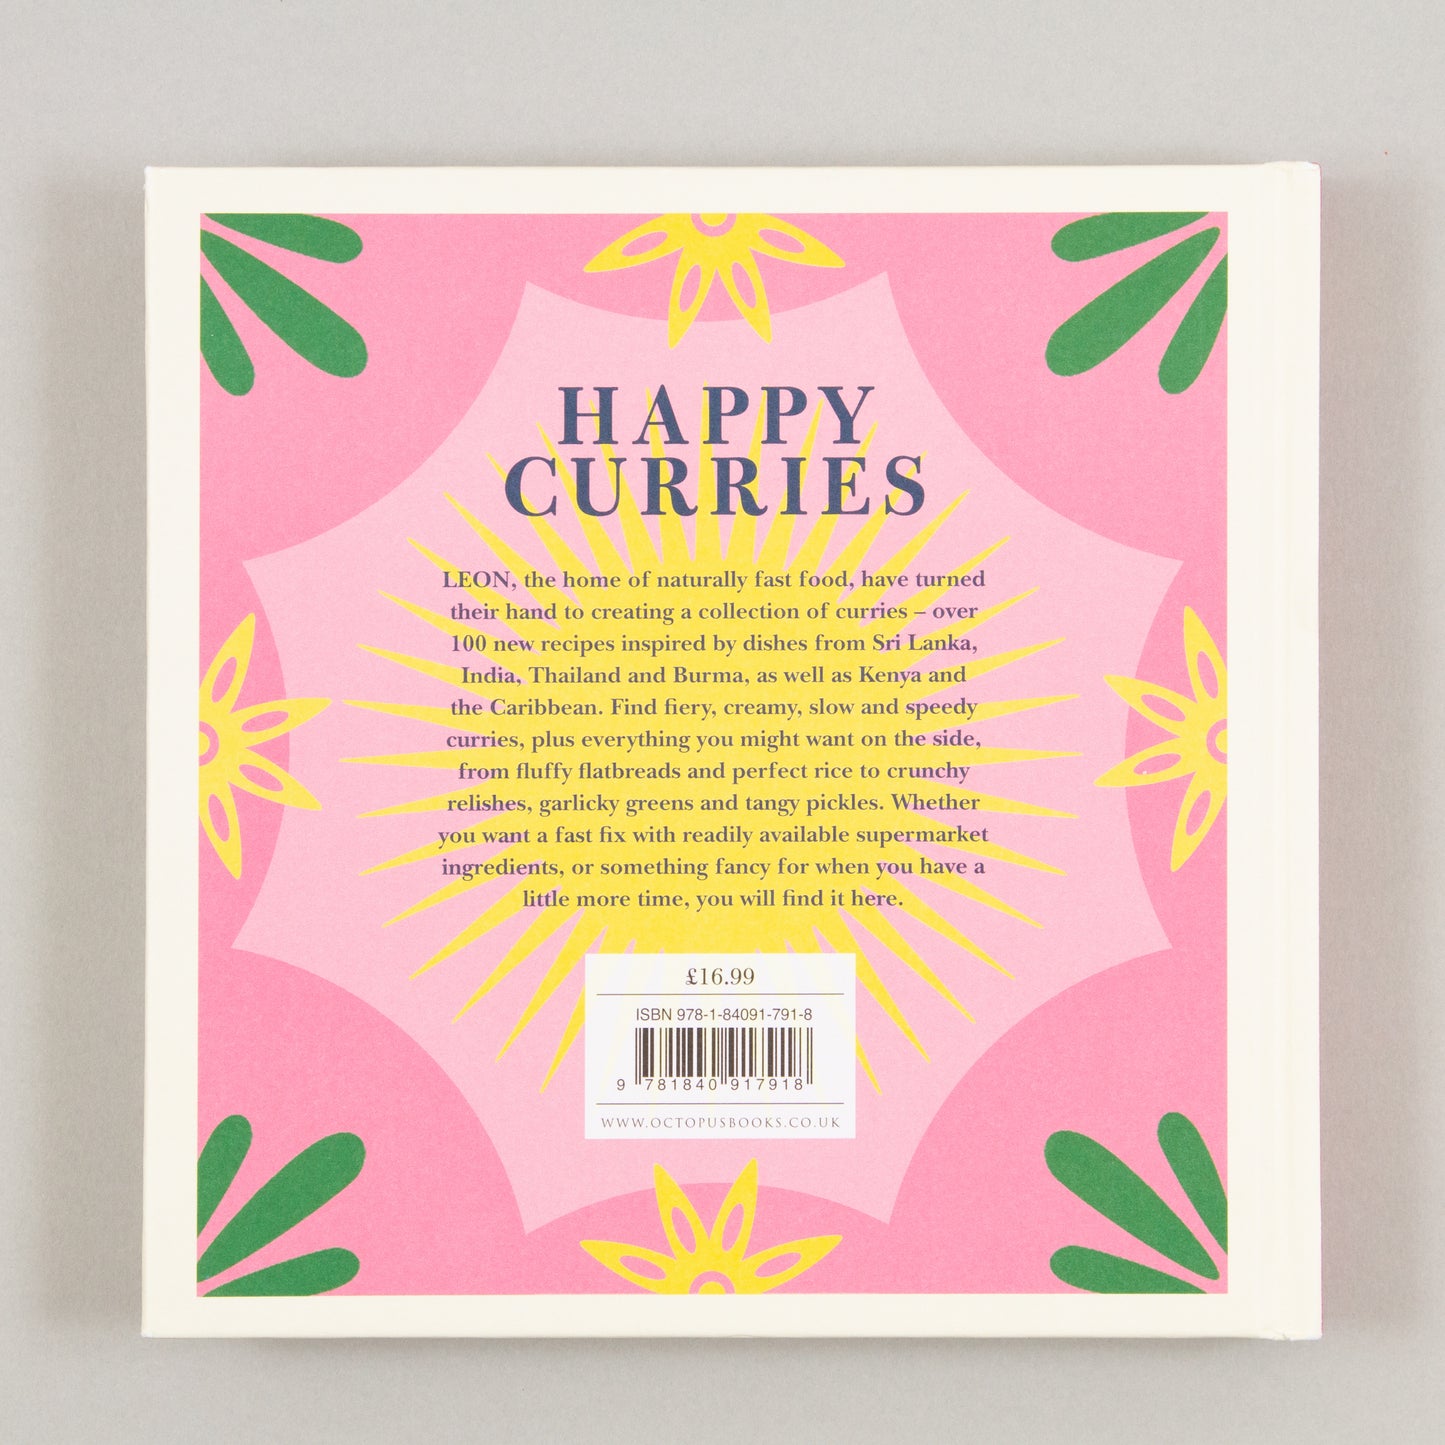 Leon: Happy Curries by Rebecca Seal & John VincentBOOKSPEED - CACTWS